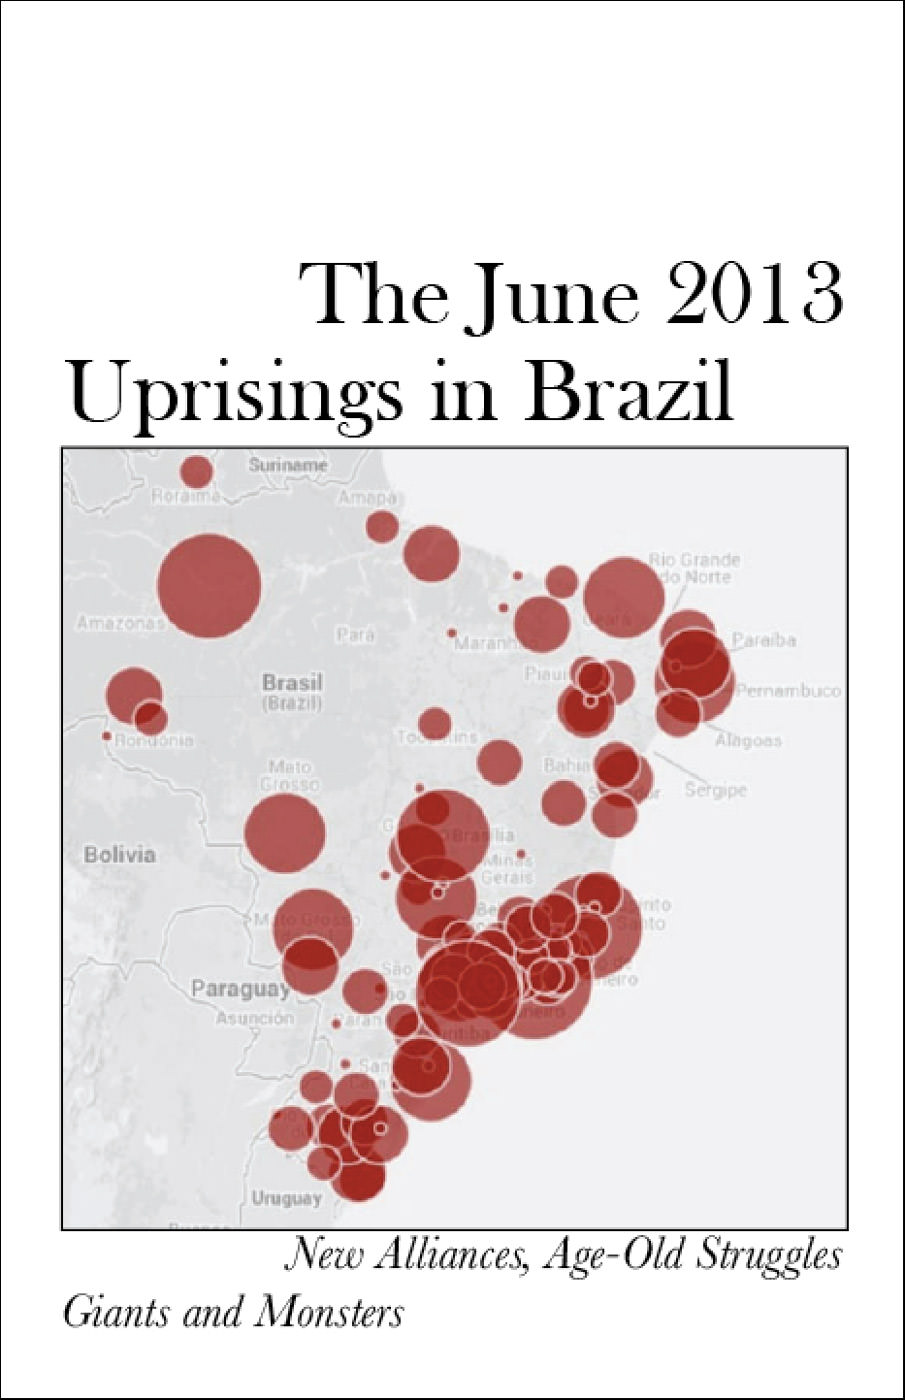 Photo of 'The June 2013 Uprisings in Brazil' front cover